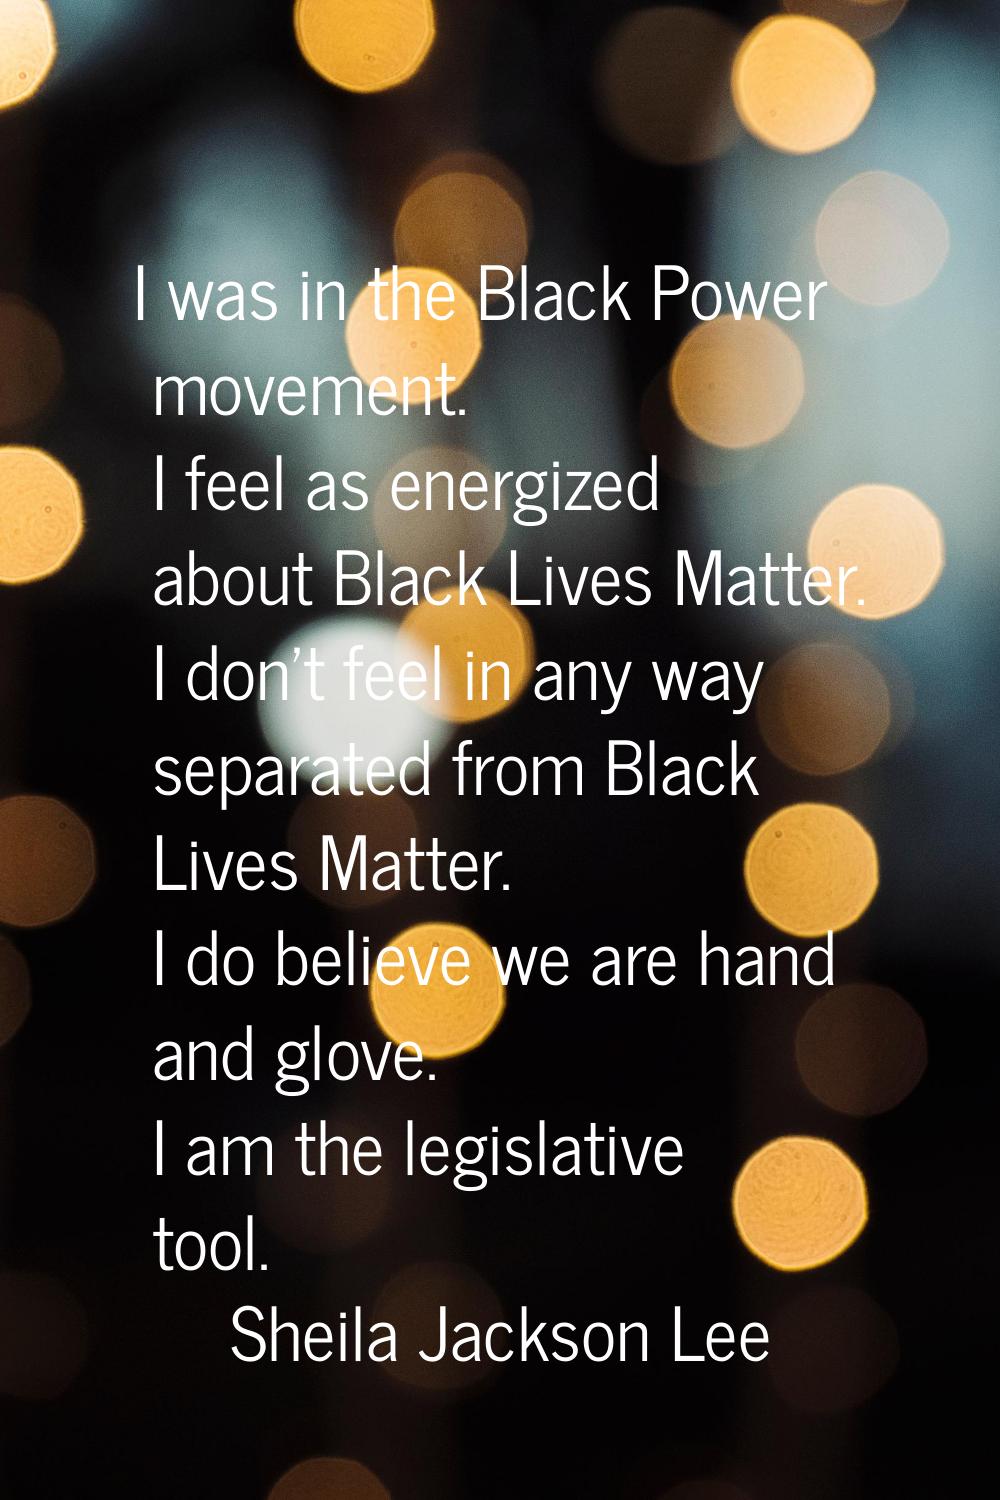 I was in the Black Power movement. I feel as energized about Black Lives Matter. I don't feel in an